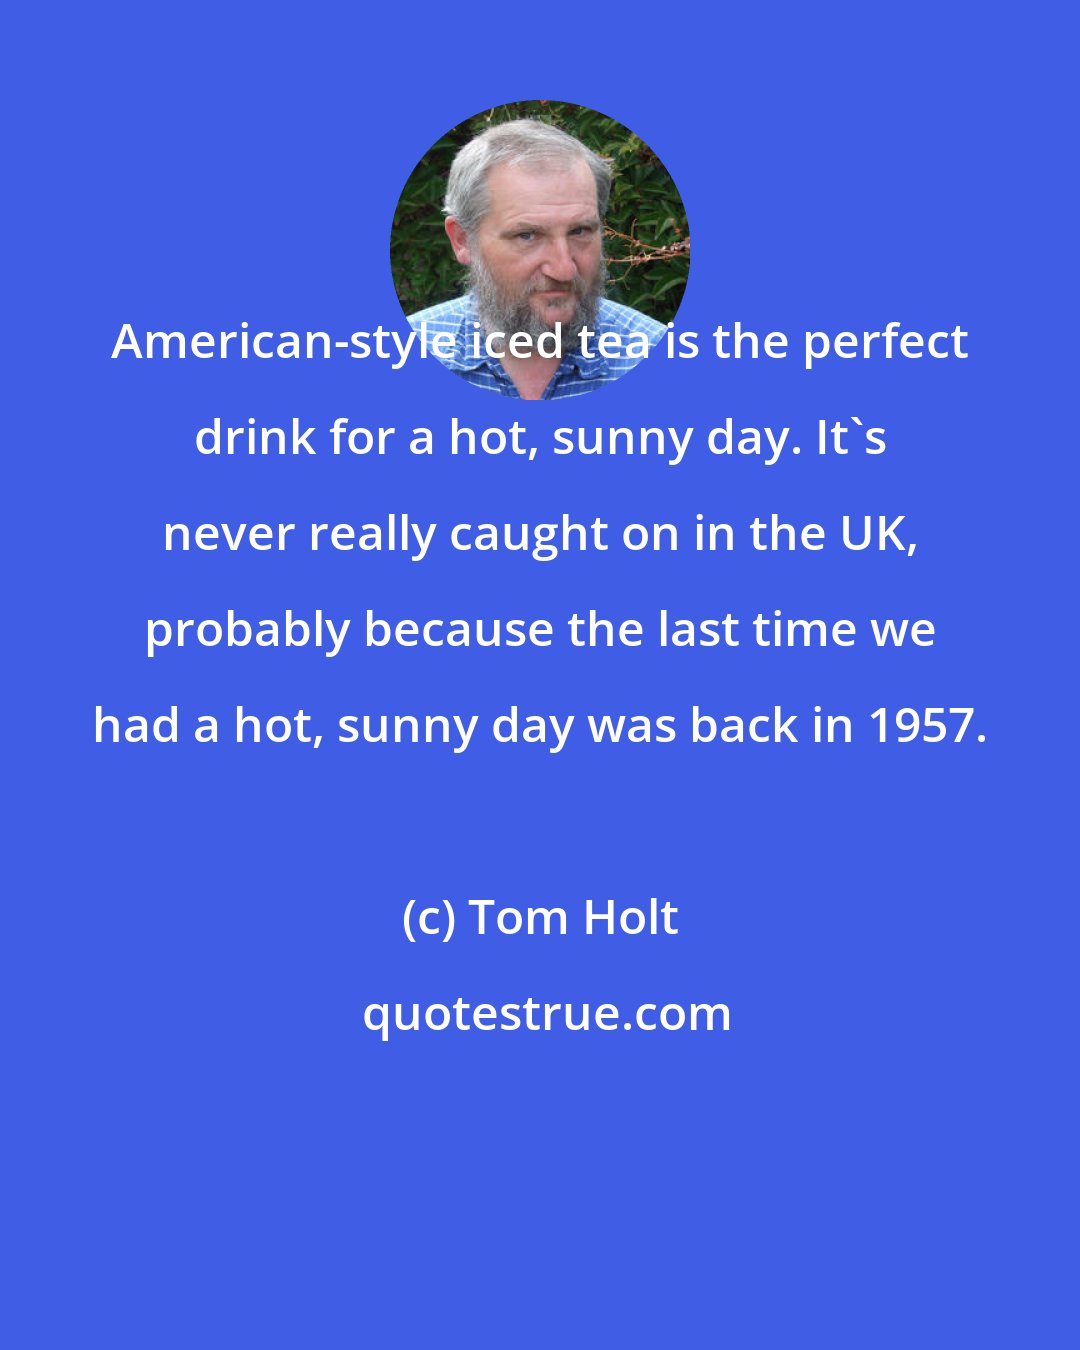 Tom Holt: American-style iced tea is the perfect drink for a hot, sunny day. It's never really caught on in the UK, probably because the last time we had a hot, sunny day was back in 1957.